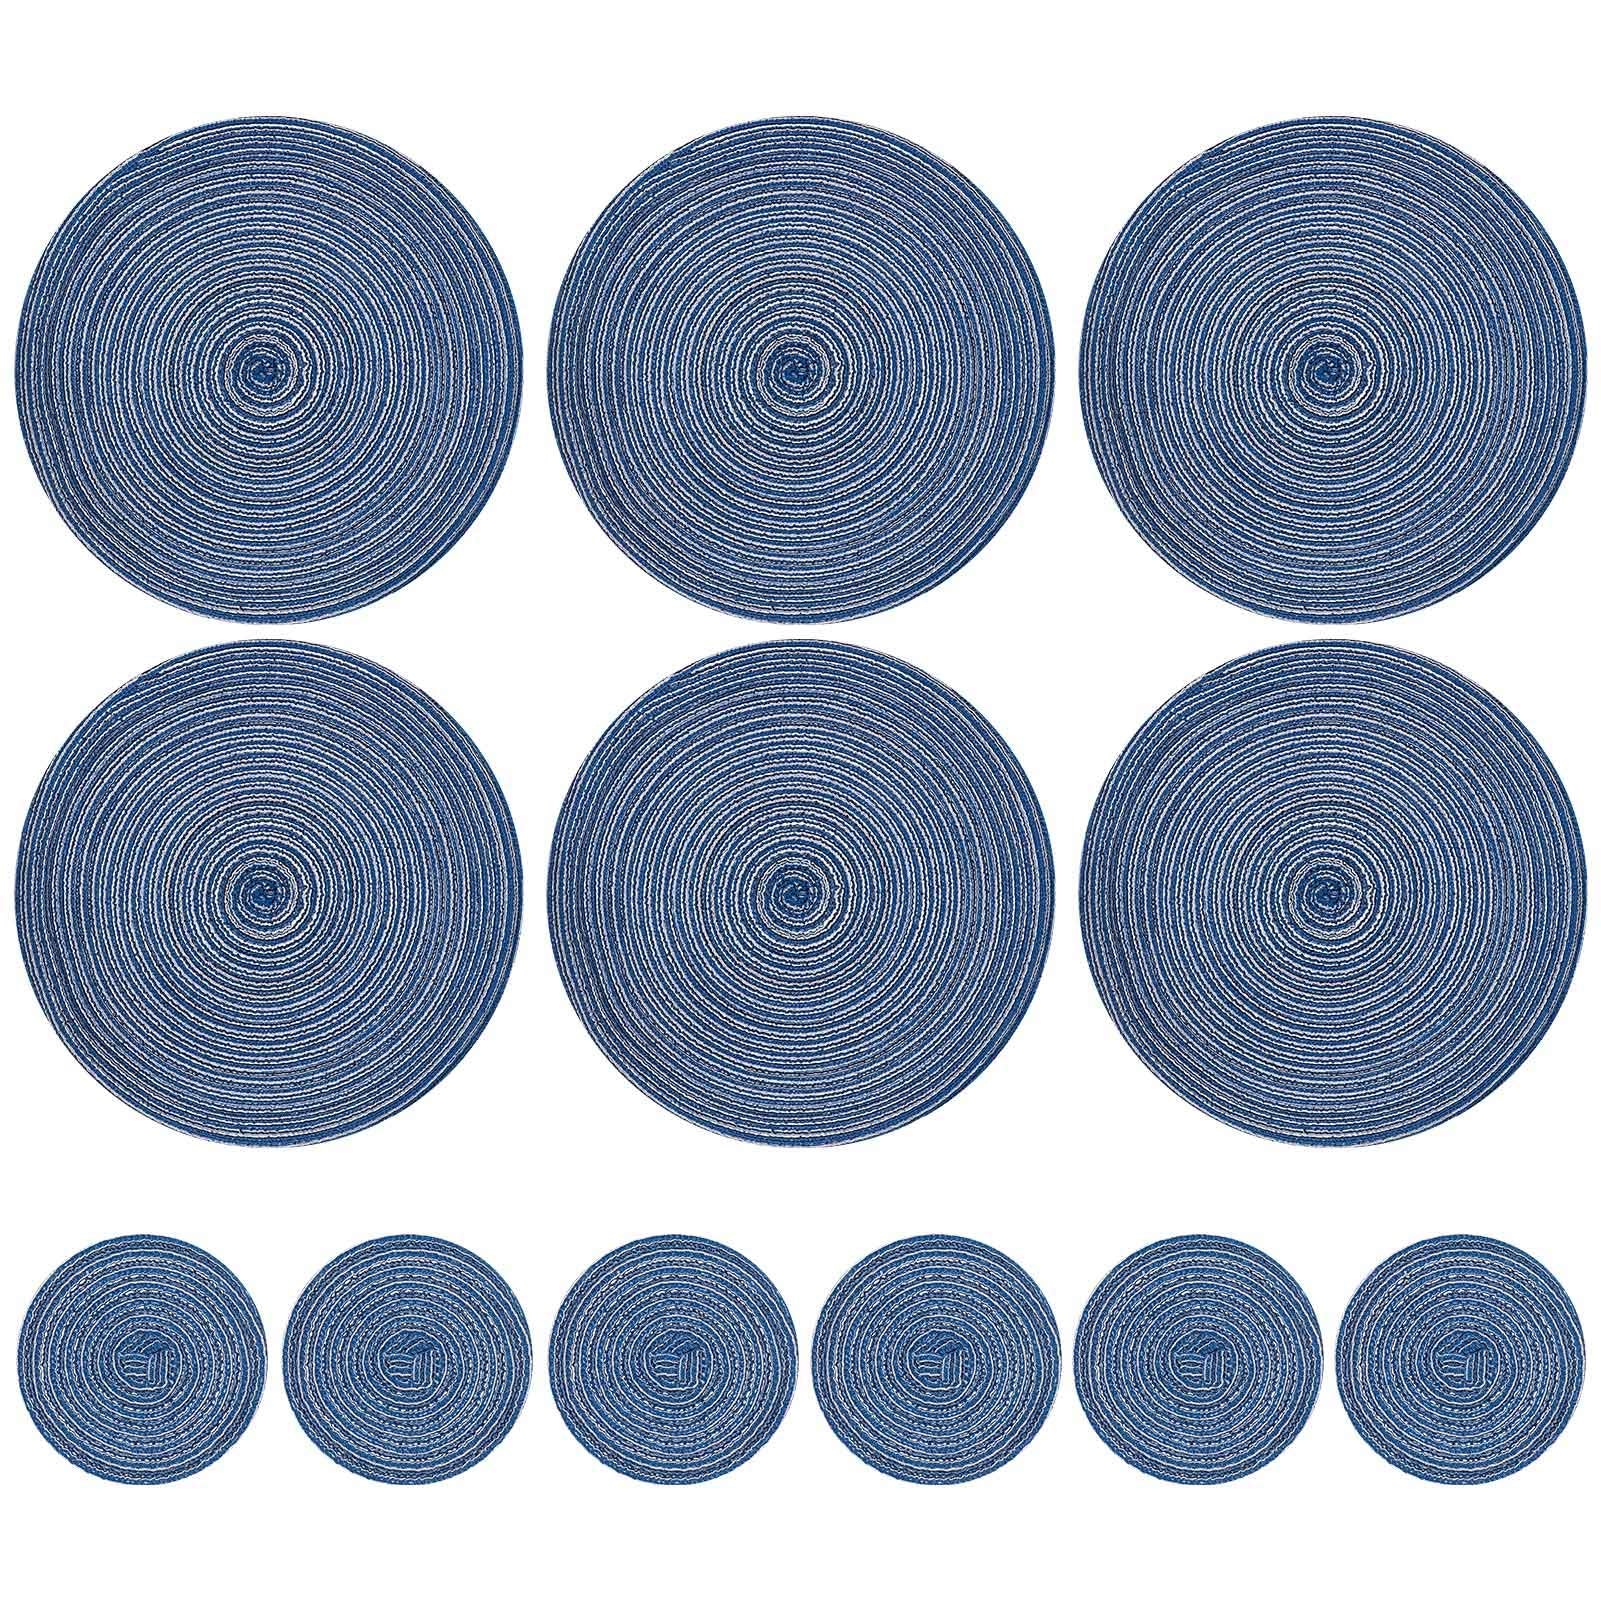 Cerolopy 12Pcs Round Place Mats/Coaster Set, Durable and Insulation Nordic Style Hemp Cotton Threaddining Table Placemats, Non-Slip&Washable 12 Inch Table Mats and 4 Inch Coasters(Blue)